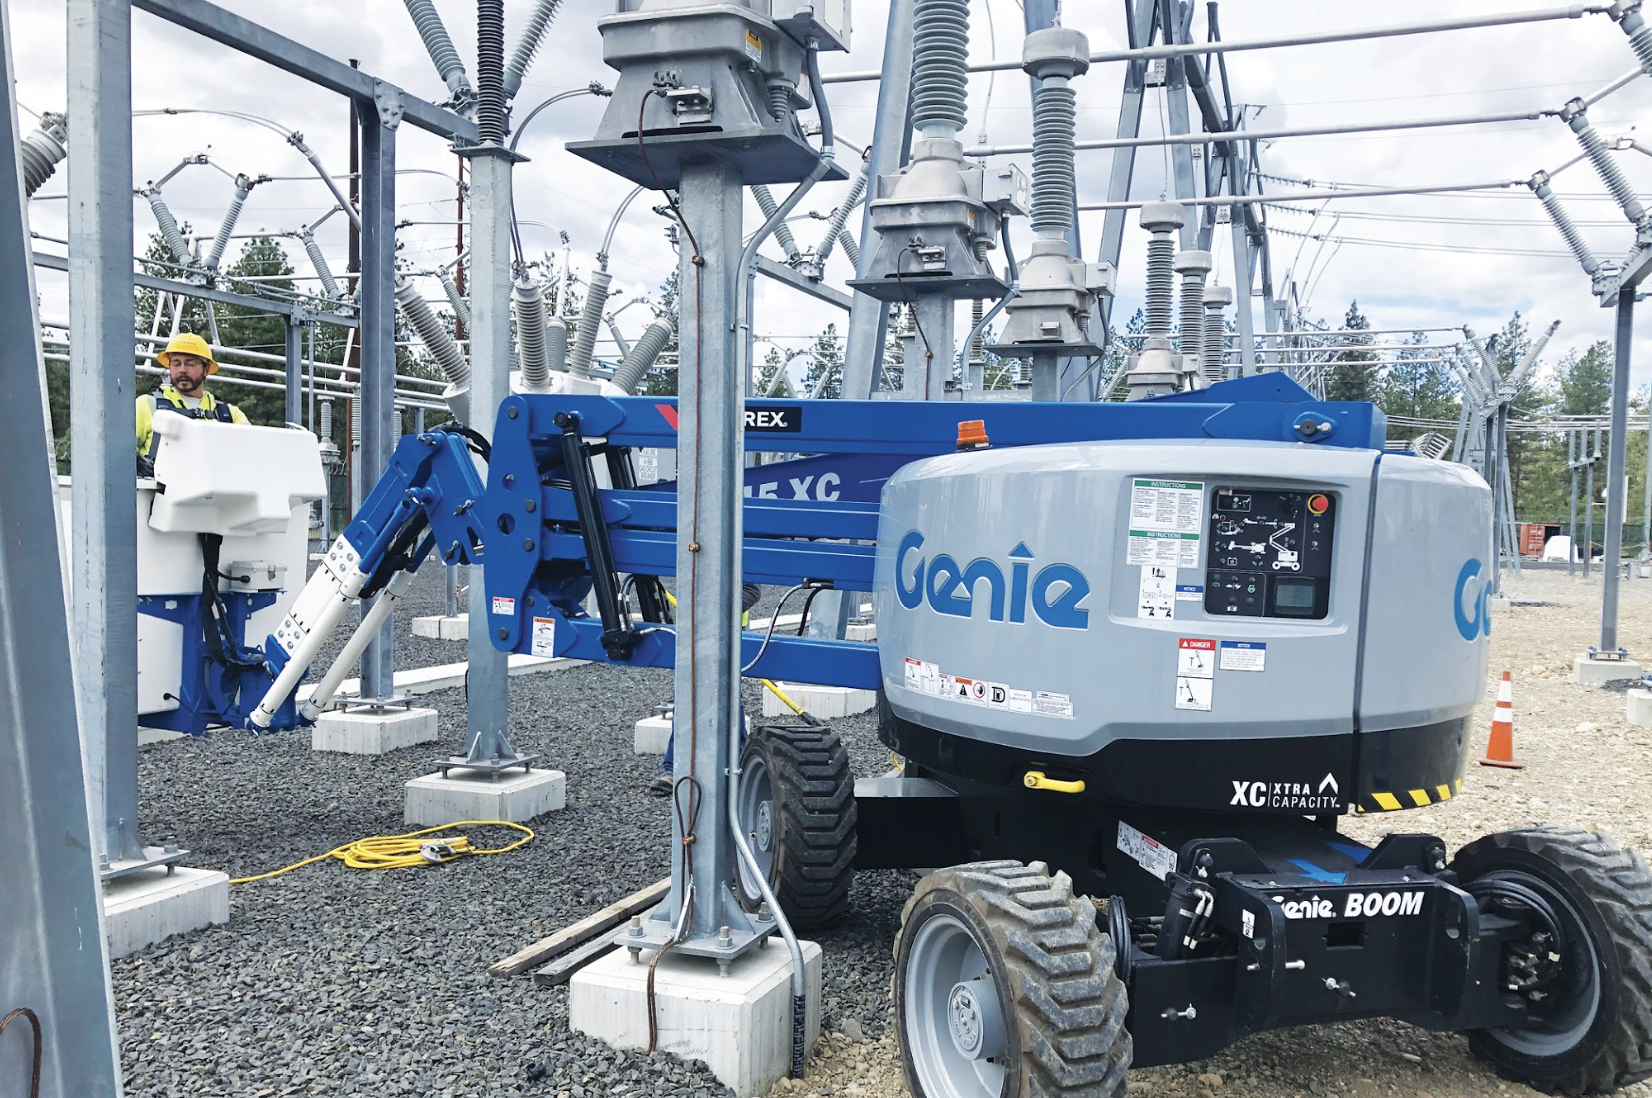 Terex Utilities & Genie Introduce Insulated Boom Lift Solution for Safe Substation Work